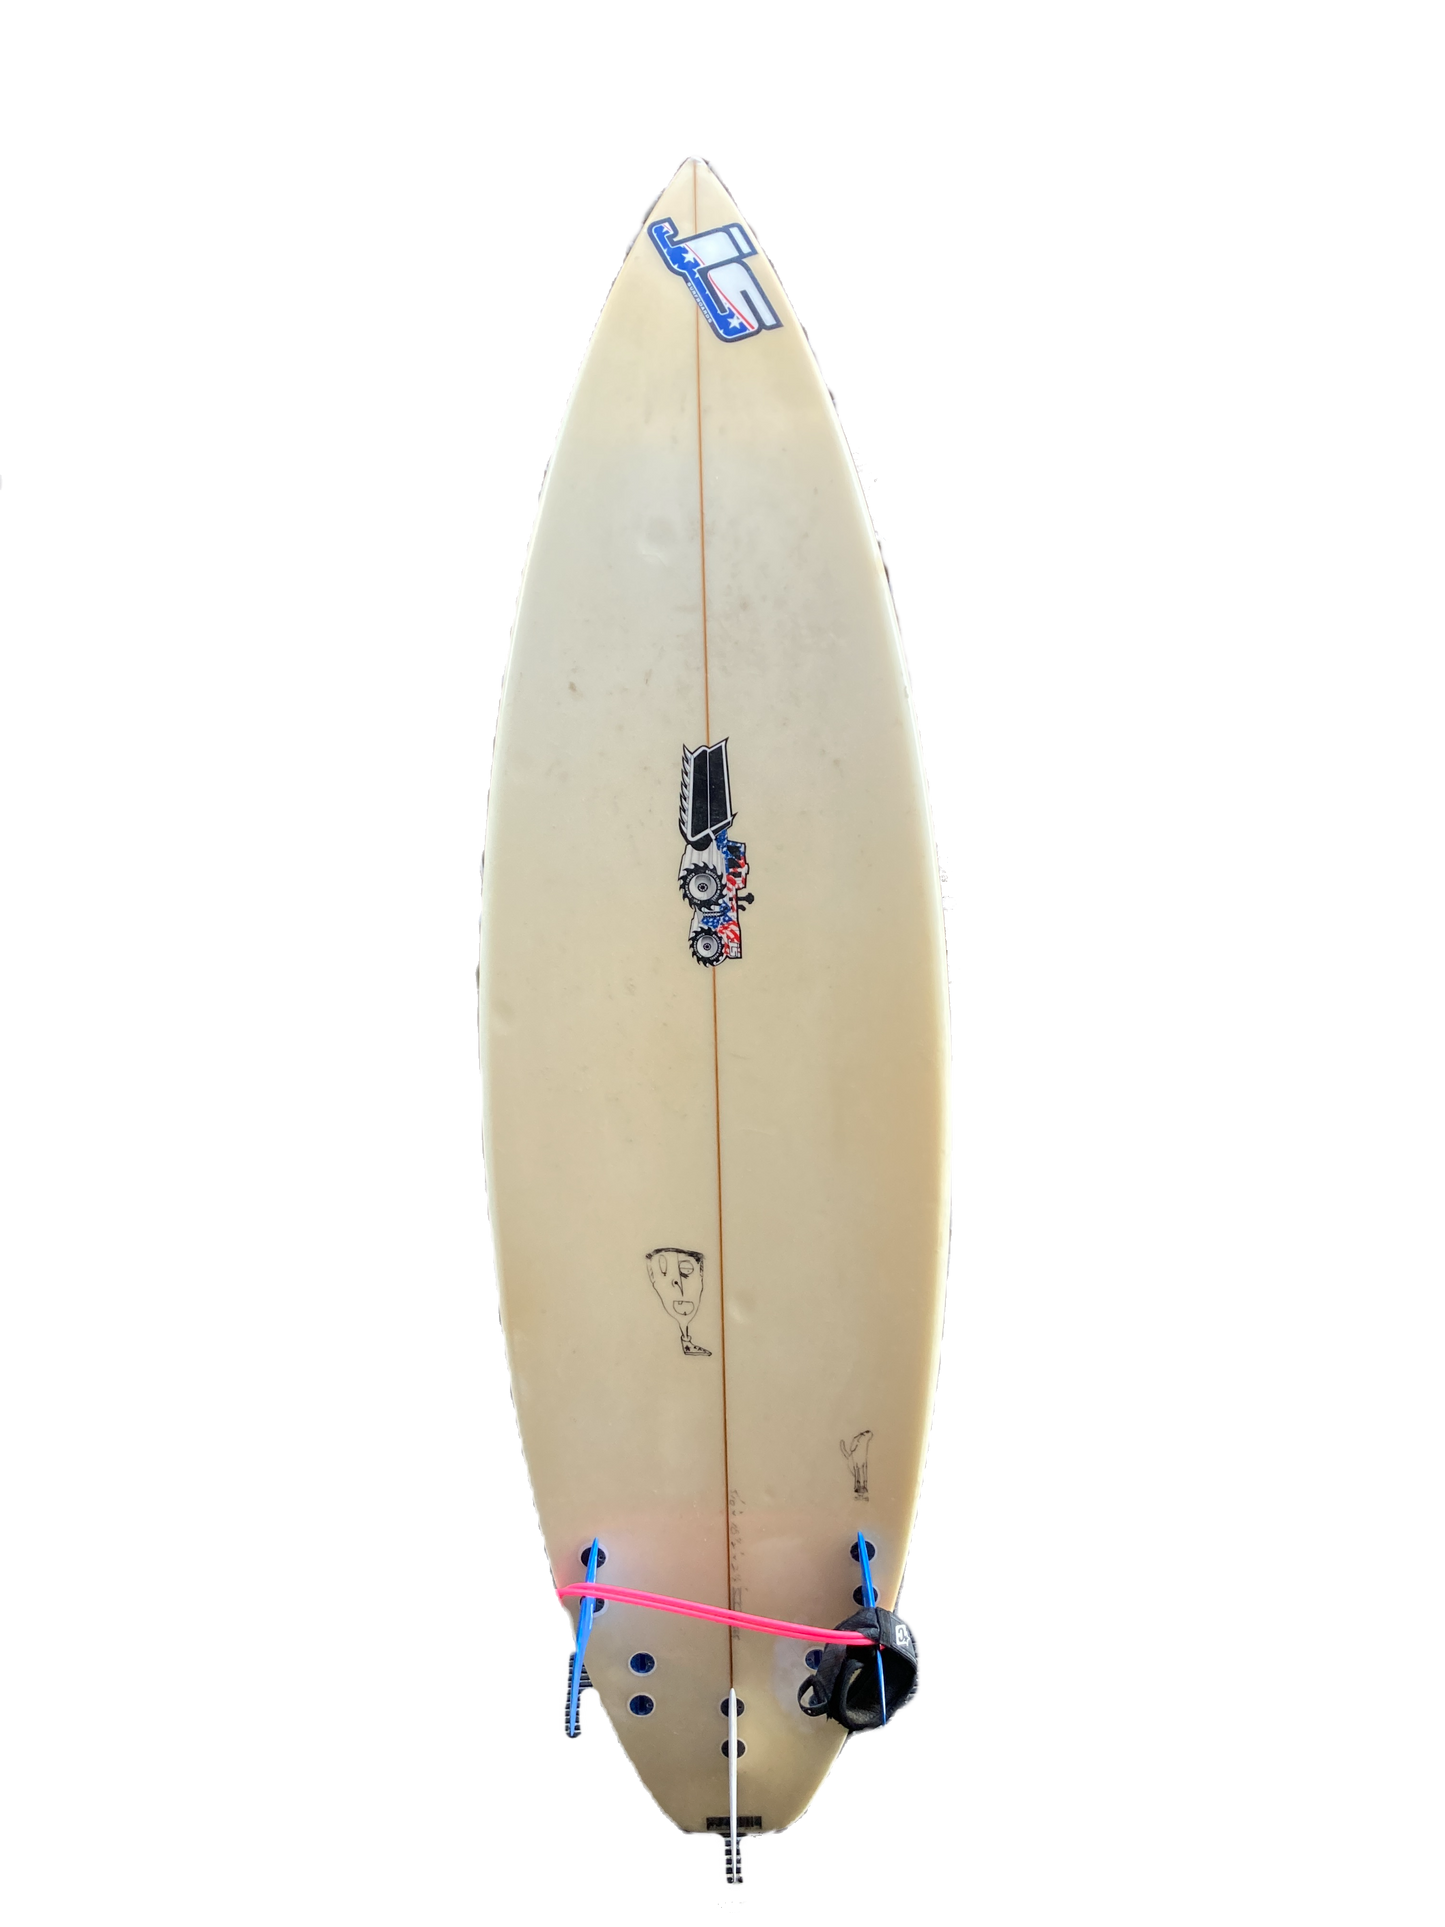 USED: JS Bruce Irons Board